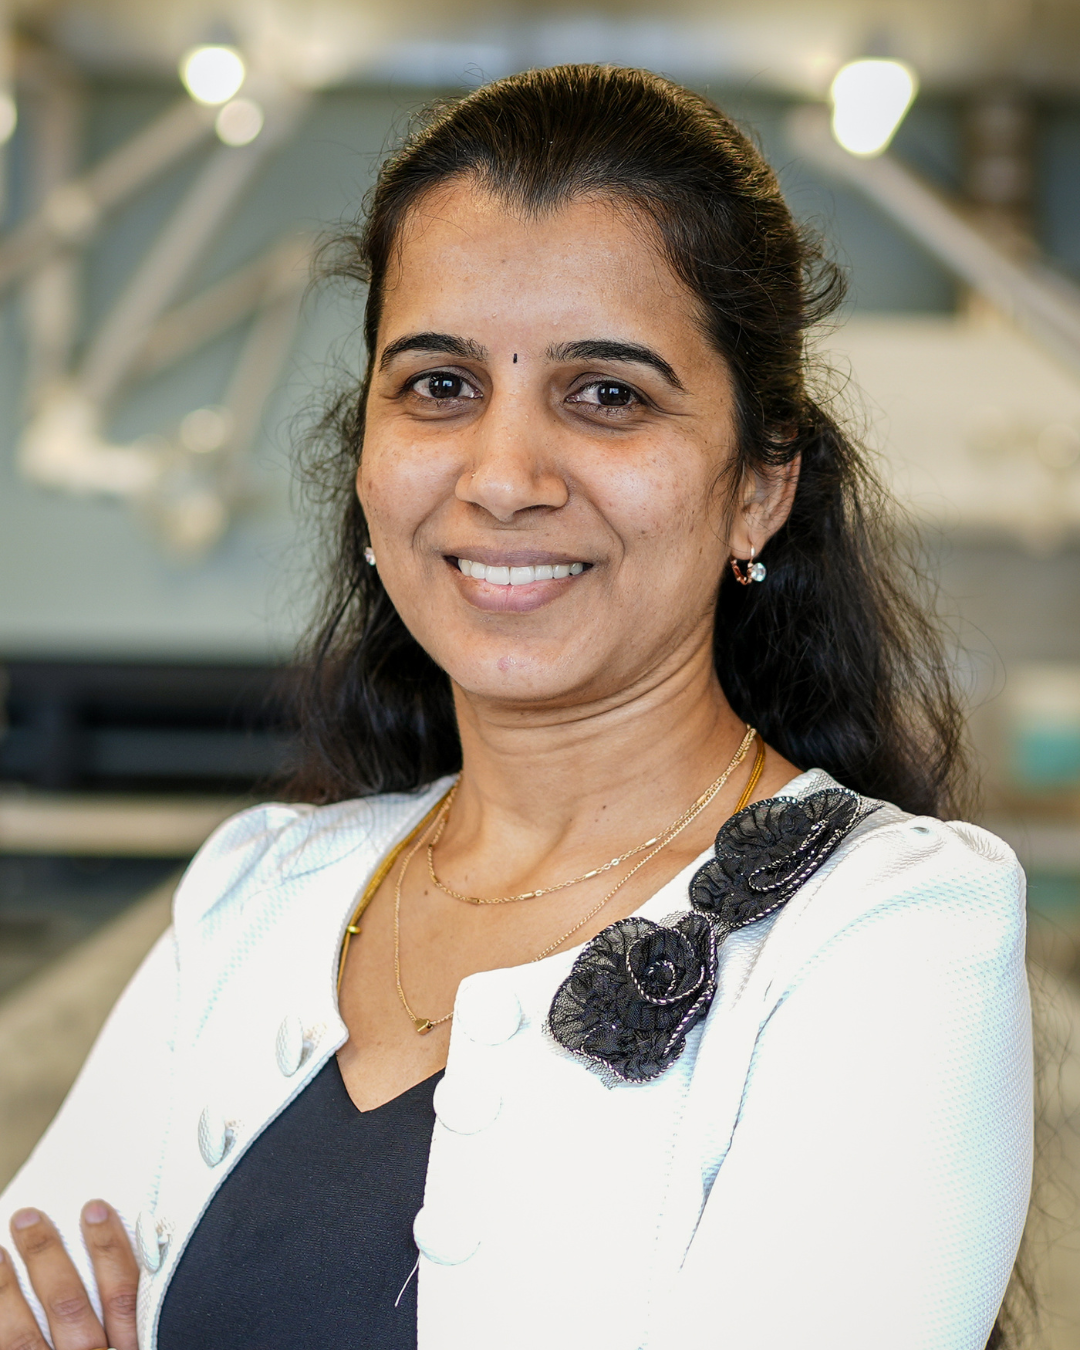 Subha Kalyaanamoorthy is a Professor of Chemistry in the Faculty of Science. She is wearing a white cardigan and his posing with her arms crossed.